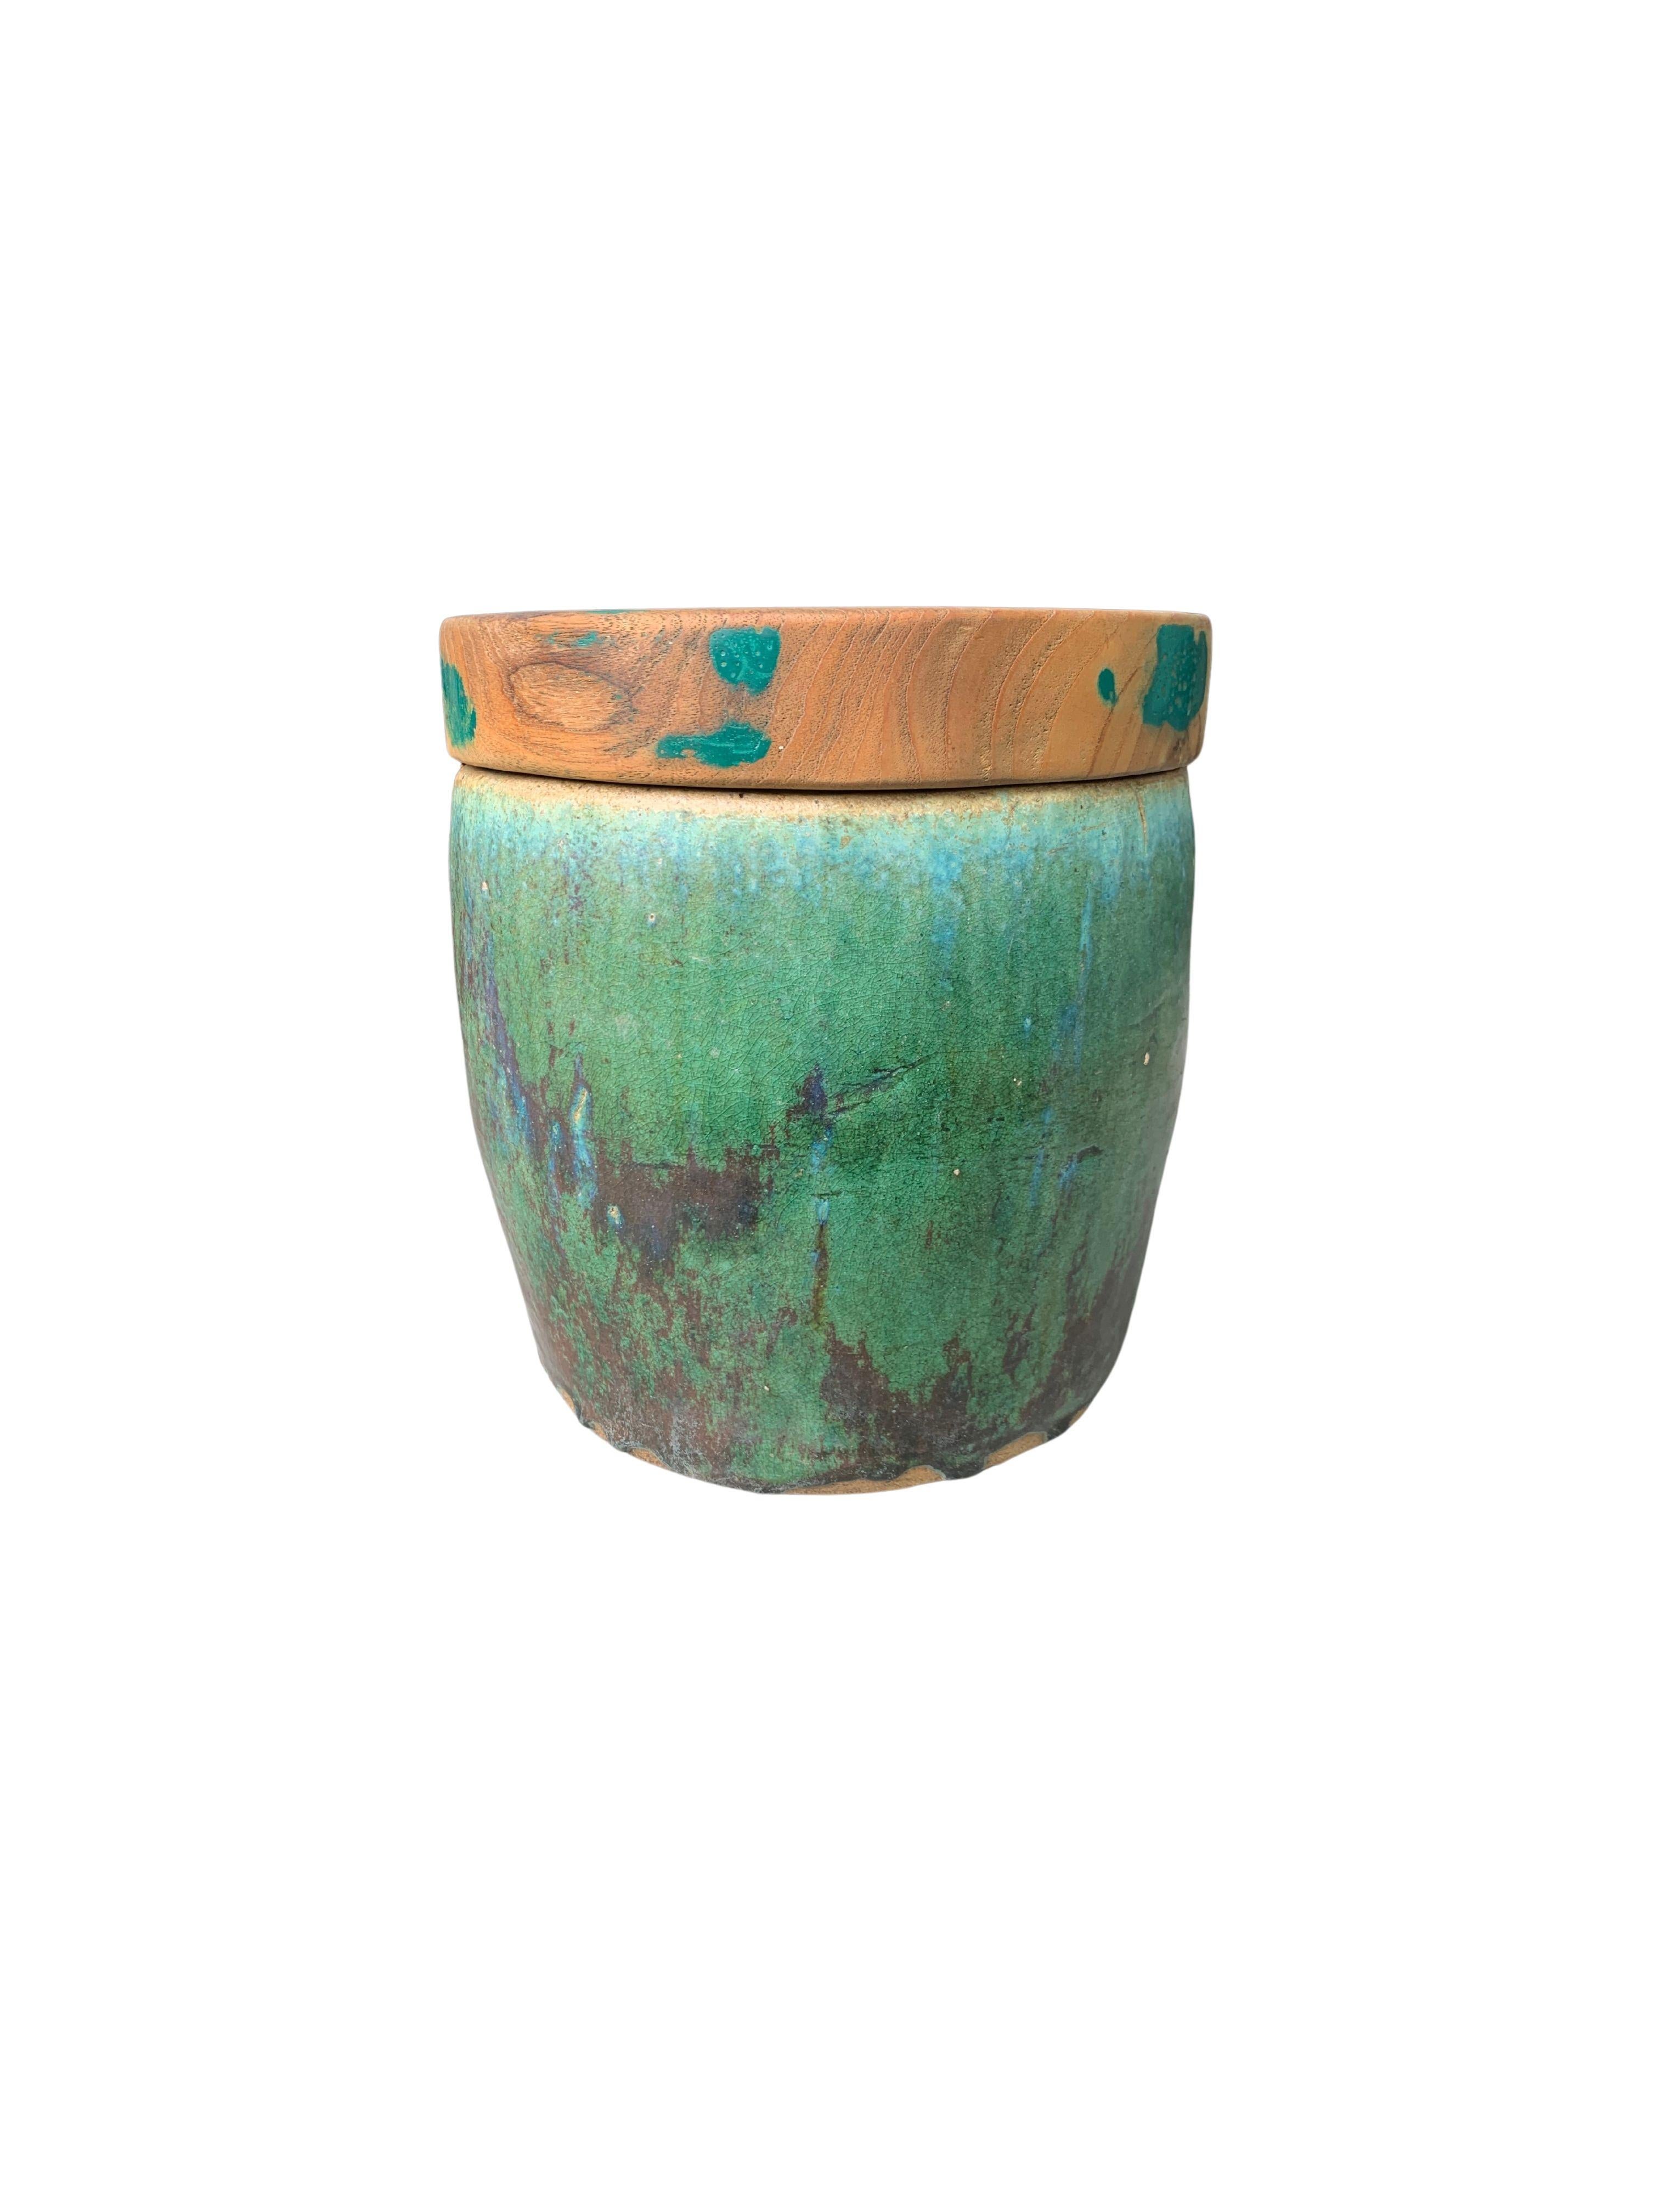 A wonderful green glaze typical of Chinese 